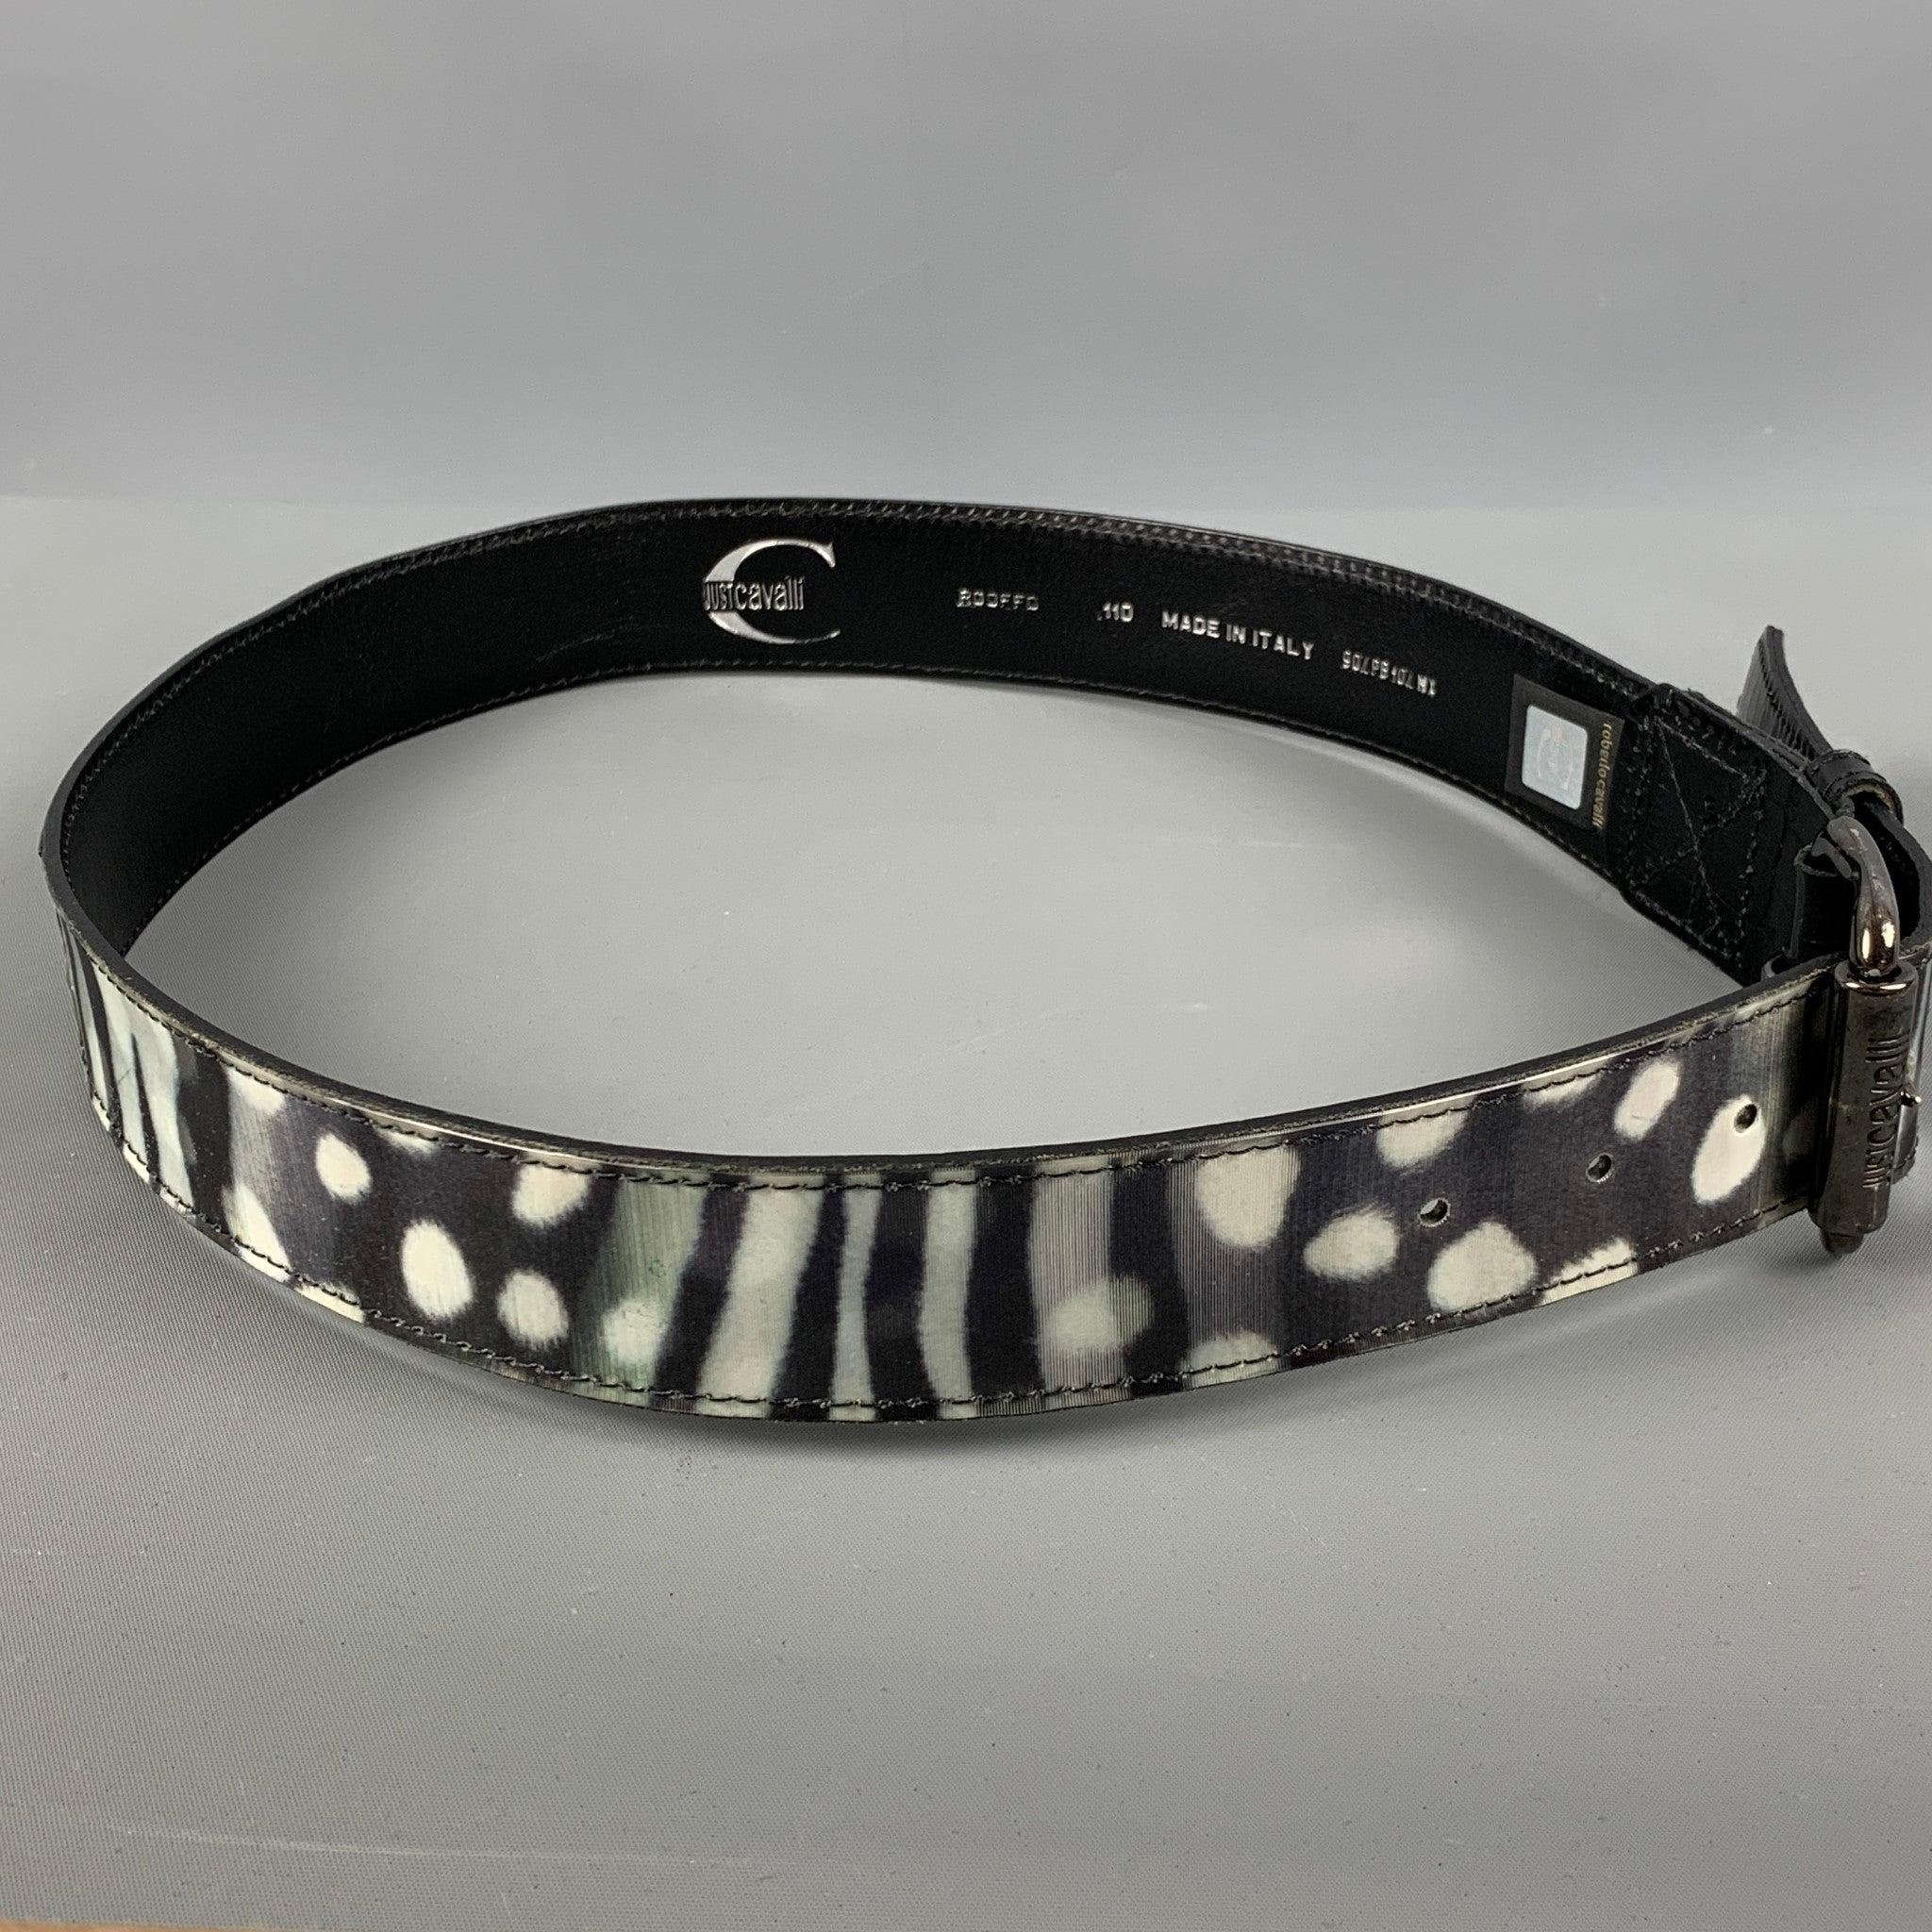 JUST CAVALLI
 belt comes in a black and white zebra leather and acetate featuring a dark metal tone buckle. Made in Italy.Very Good Pre- Owned Conditions. 

Marked:   90/PB10/WXLength: 37.5 inches Width: 1.5 inches Fits: 29 inches  - 35 inches